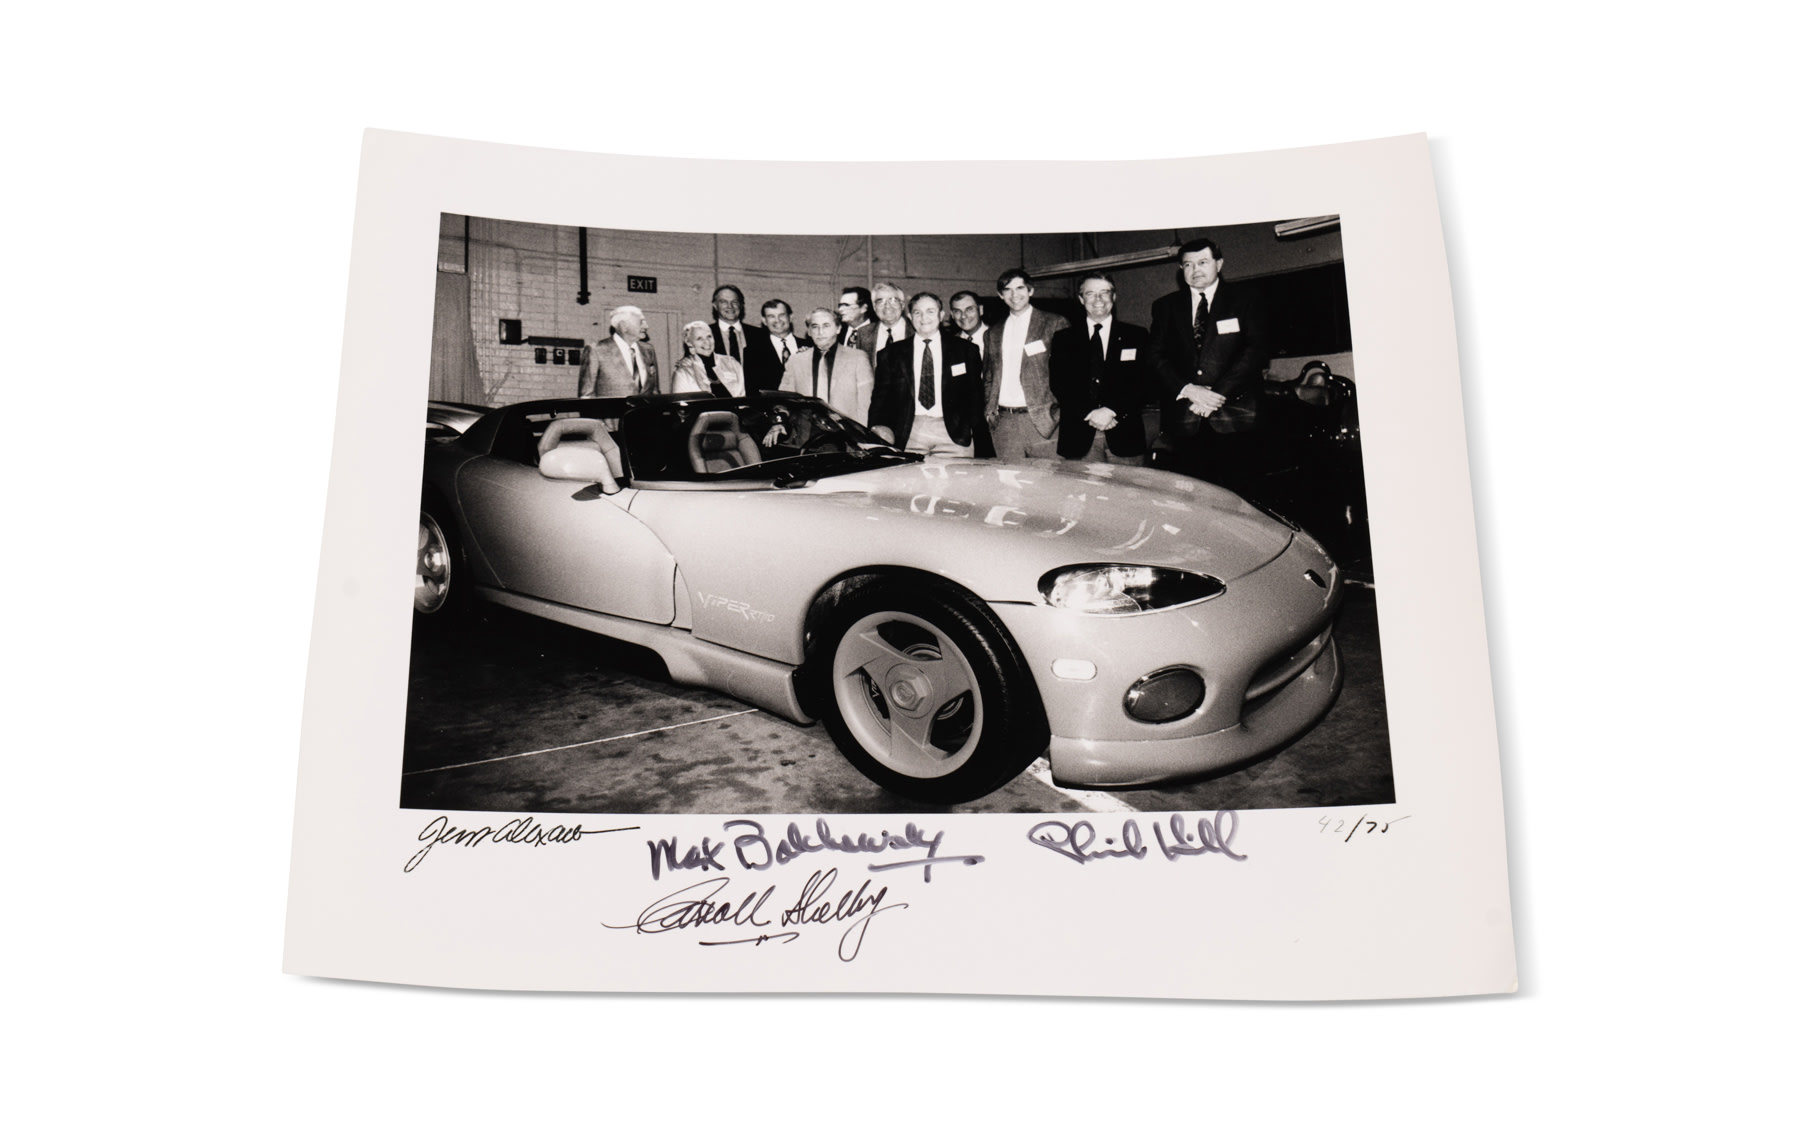 Photograph of the Dodge Viper RT/10 by Jesse Alexander, Signed by Carroll Shelby, Max Balchowsky, and Phil Hill